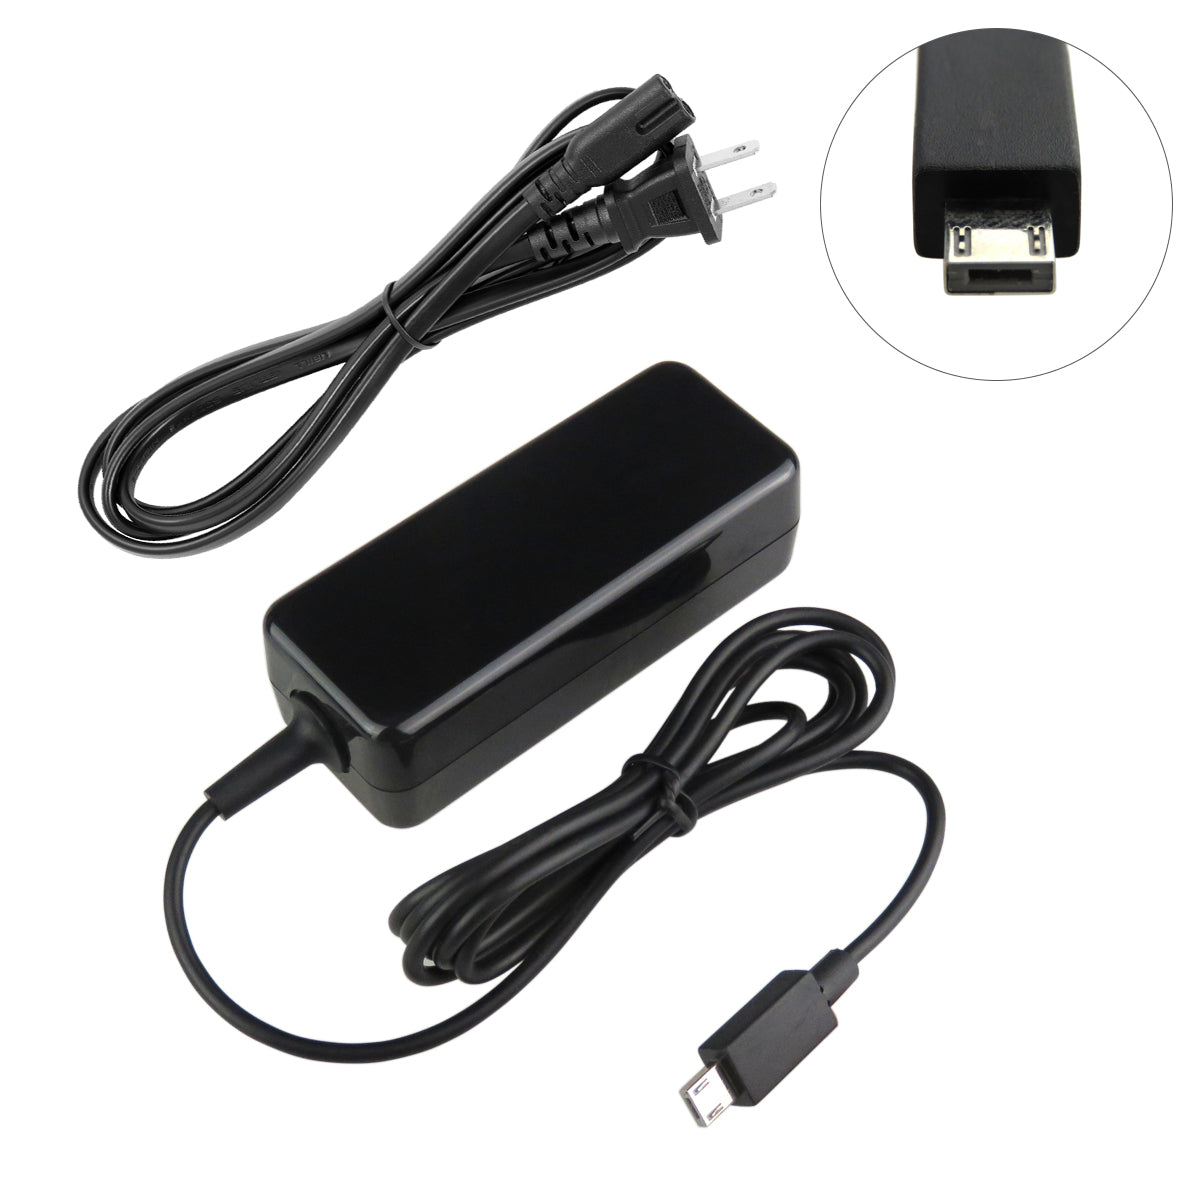 Charger for ASUS EeeBook X205TA-DS01-GD-OFCE Laptop.